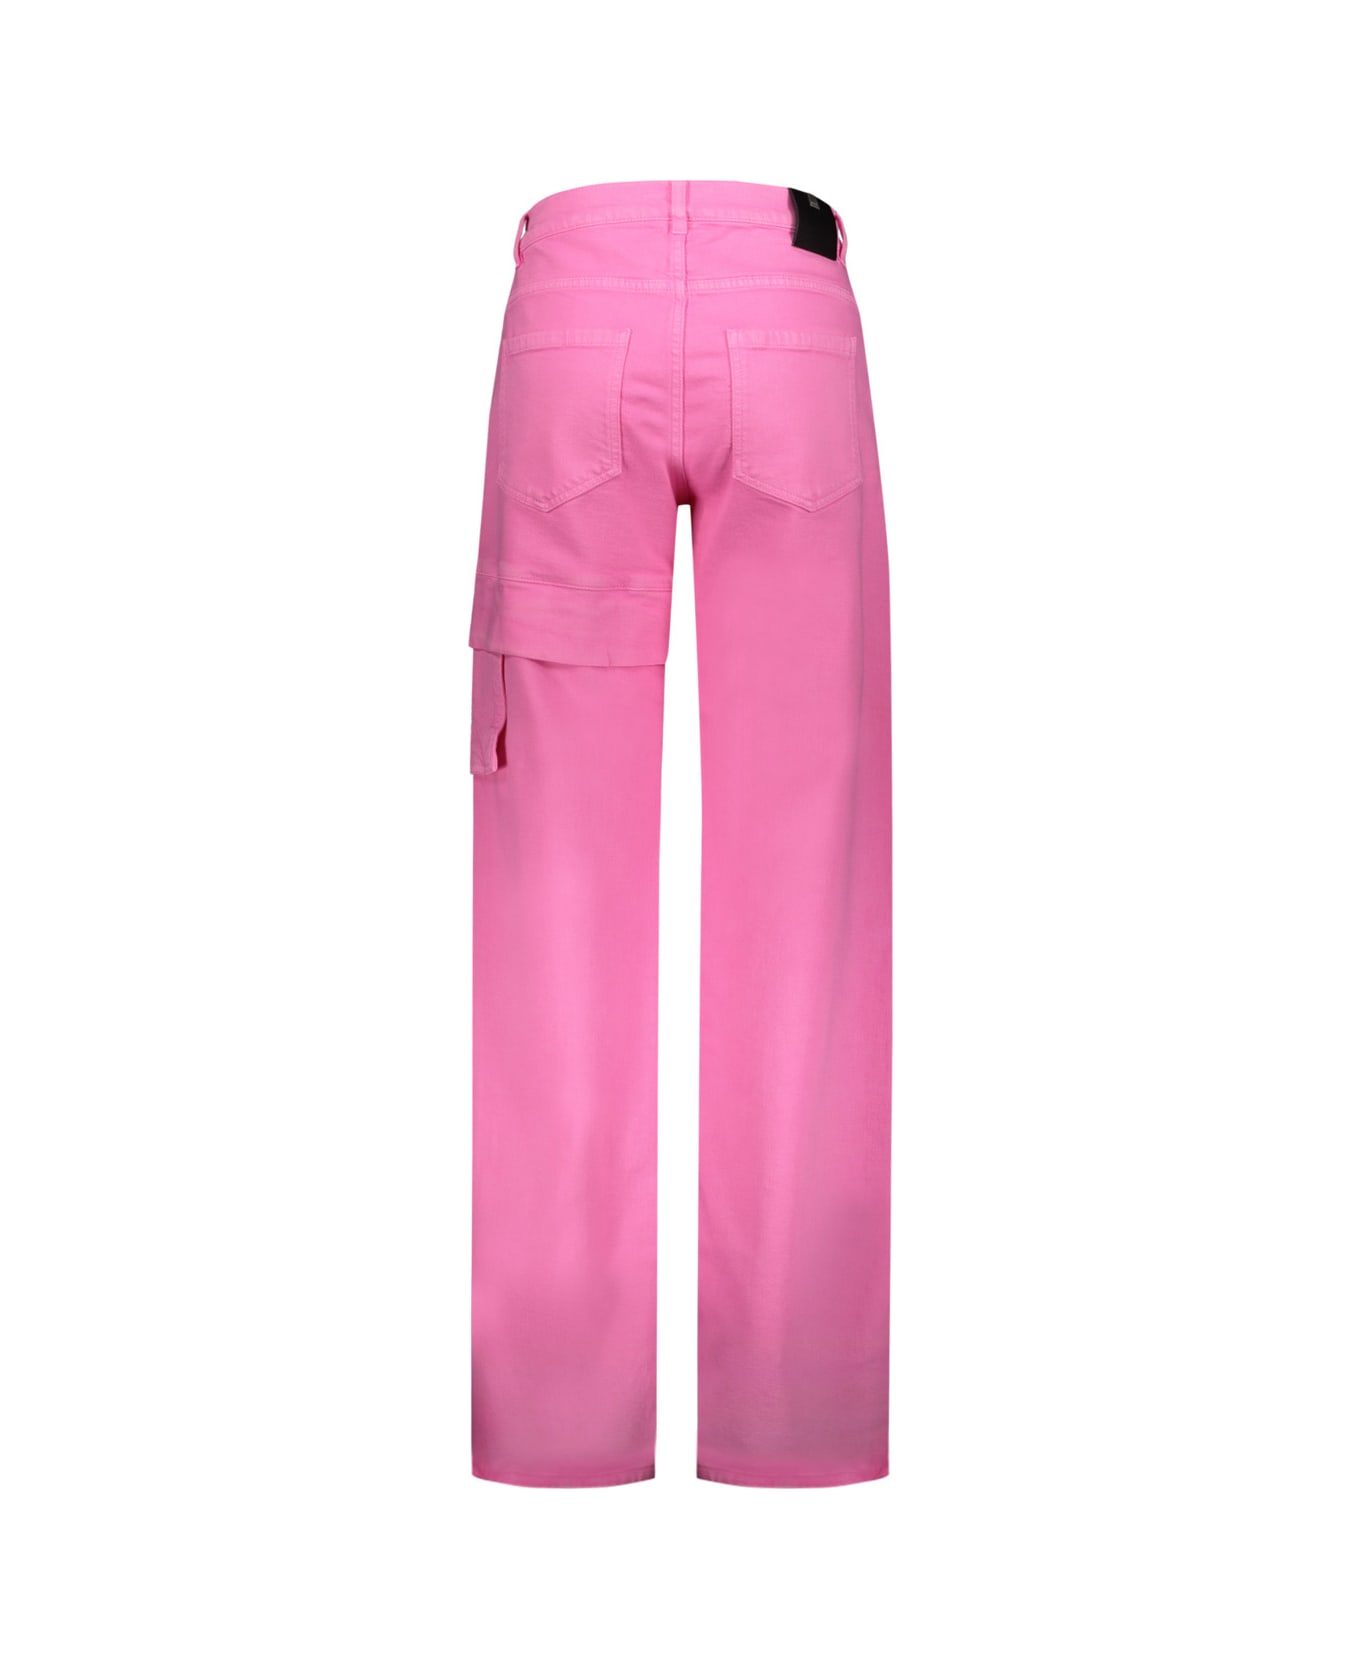 1017 ALYX 9SM Oversized Cargo Jeans - PINK ボトムス